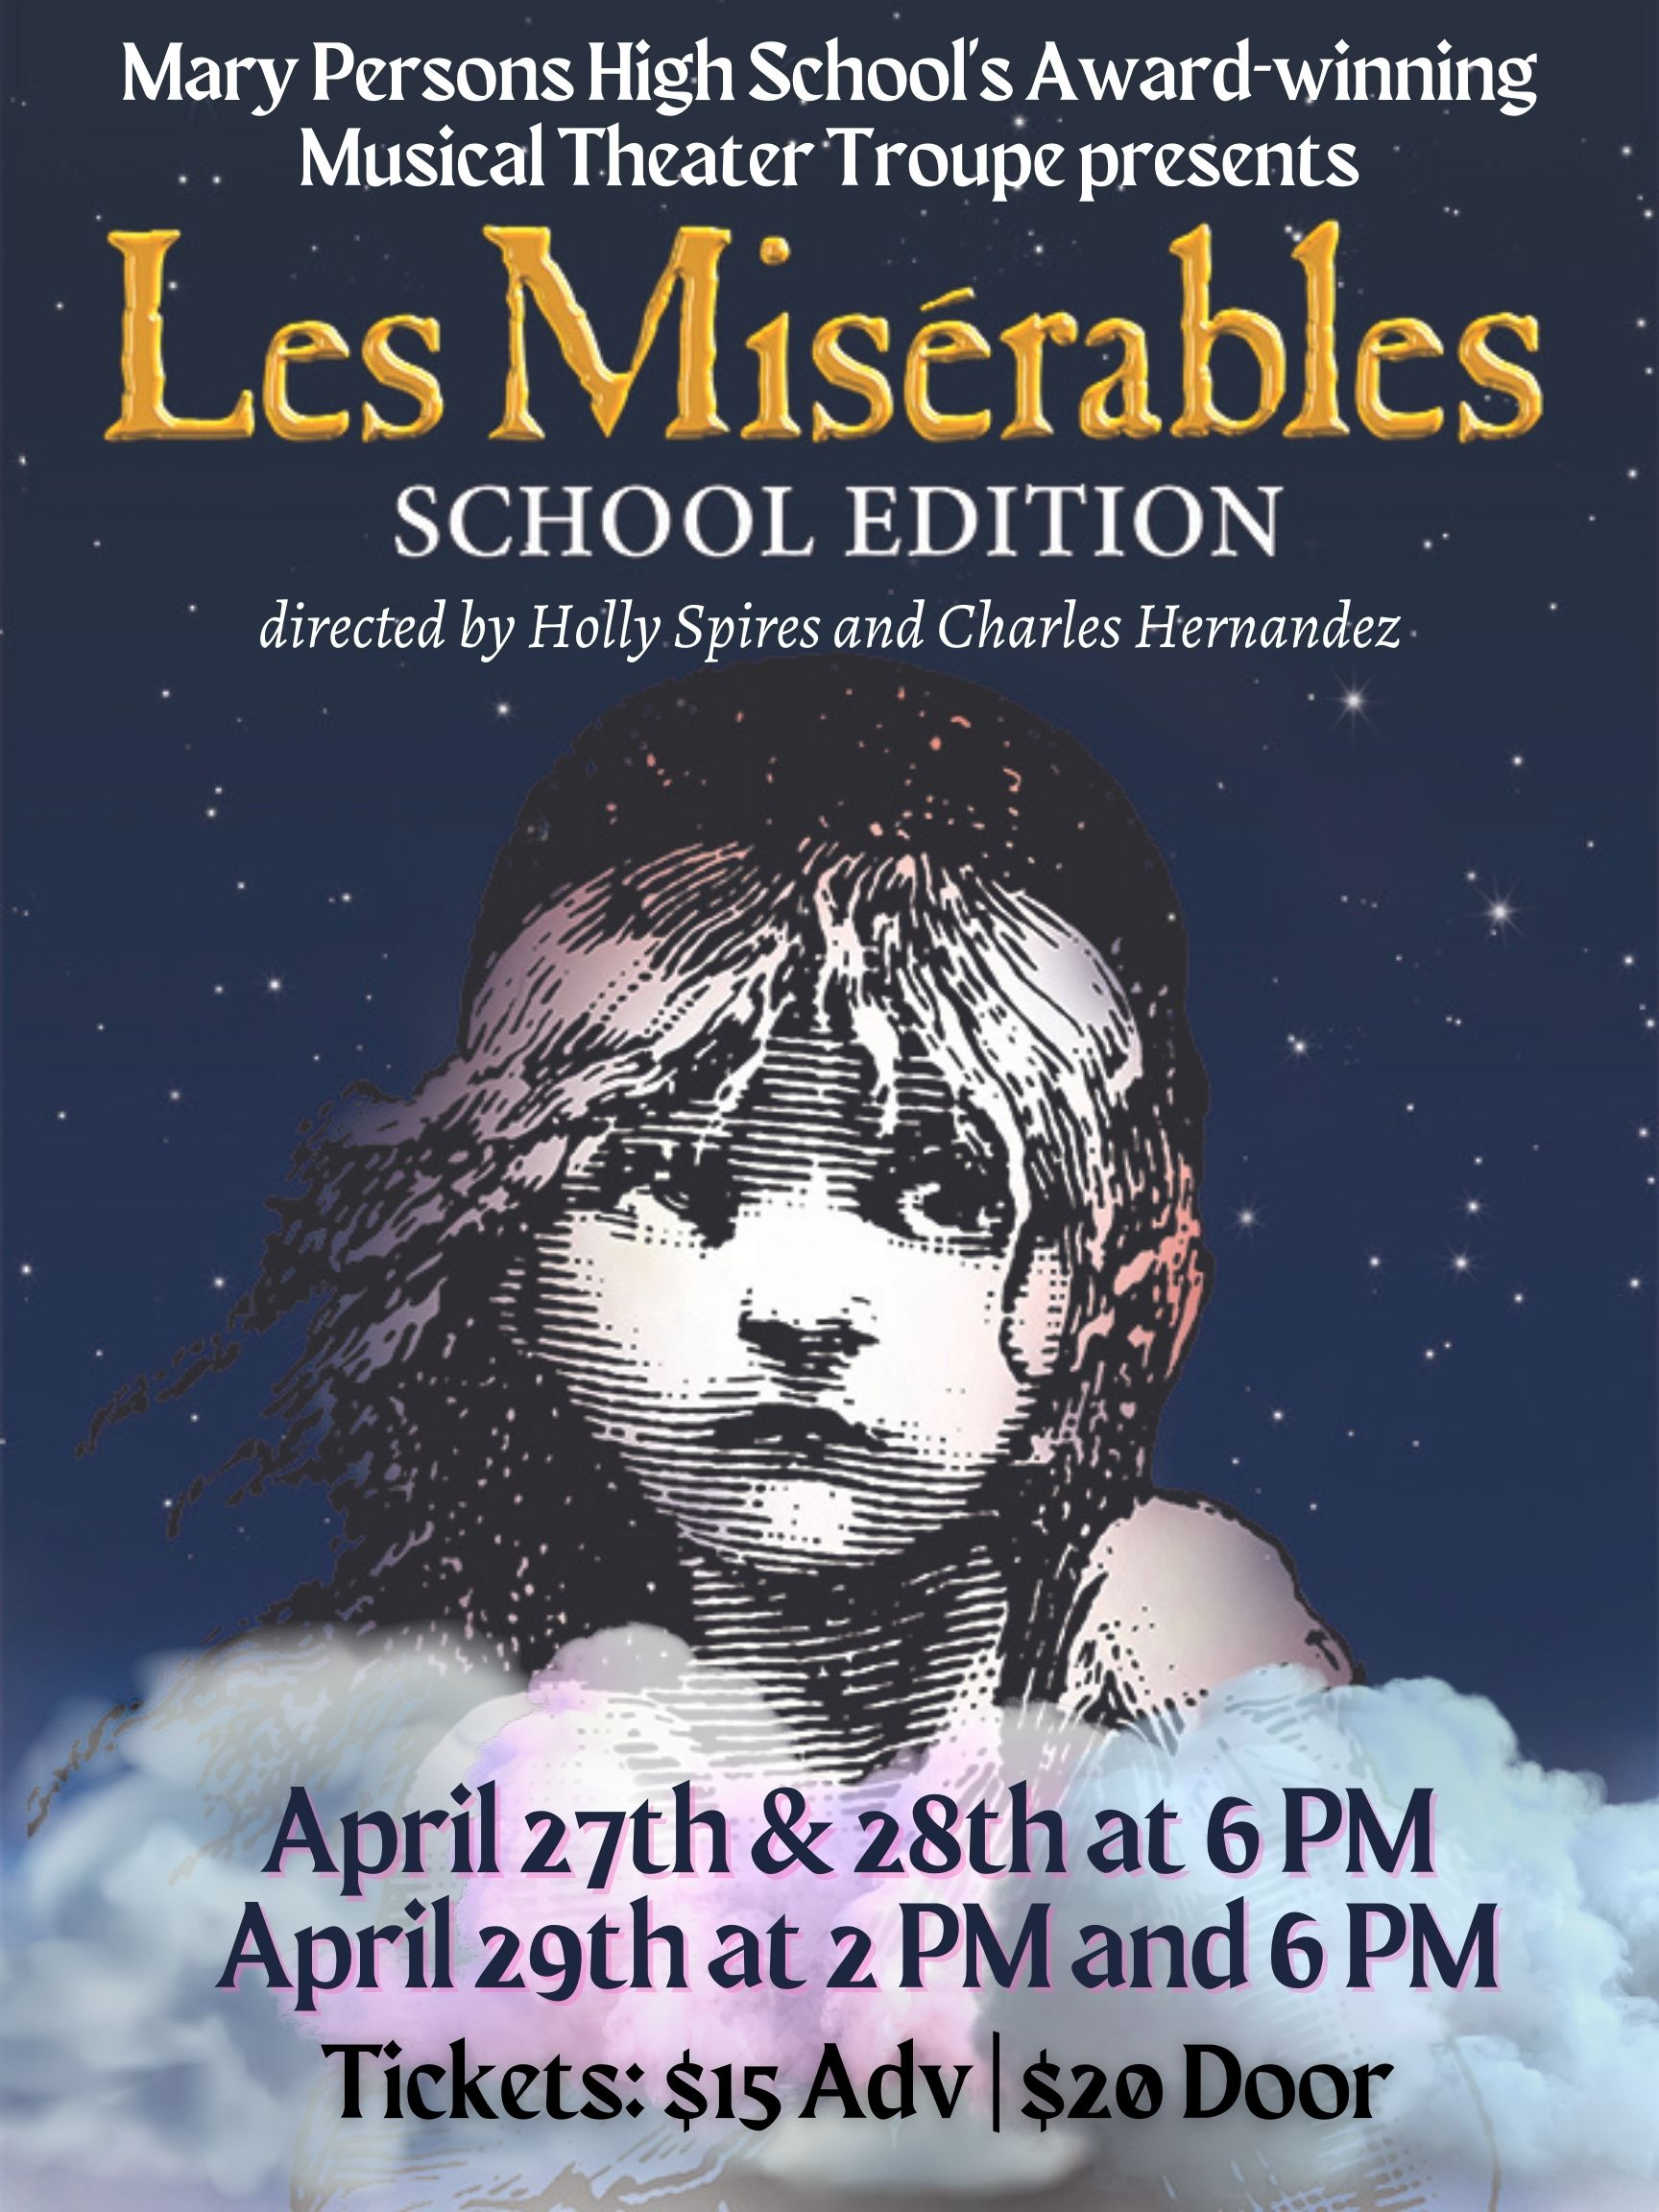 Les Miserables, April 27-29 at 6 p.m., additional showing April 29 at 2 p.m.  $20 at the door